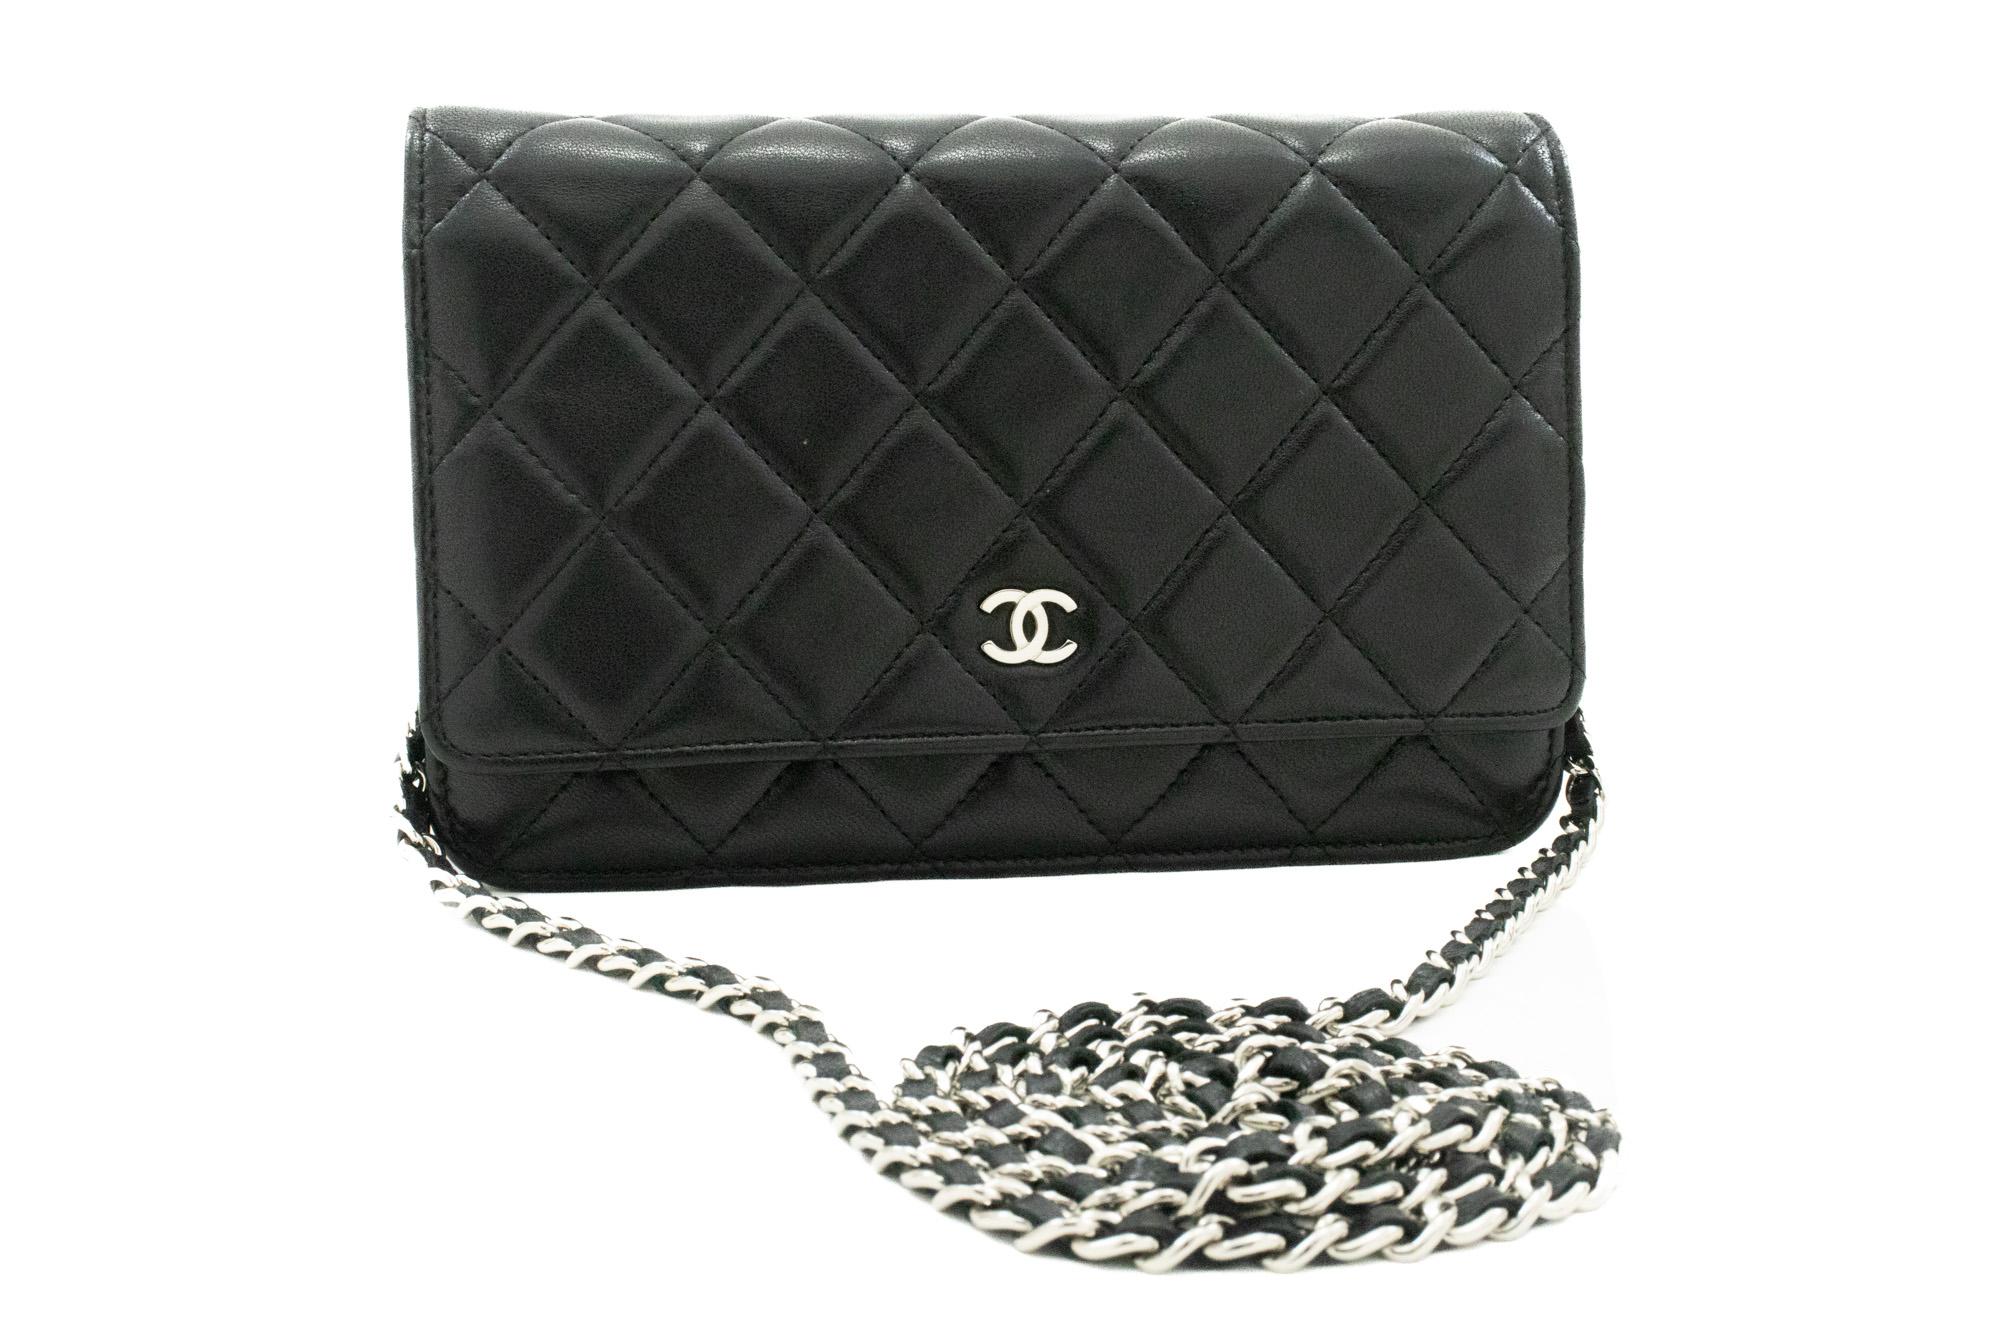 An authentic CHANEL Black Classic Wallet On Chain WOC Shoulder Bag made of black Lambskin Silver. The color is Black. The outside material is Leather. The pattern is Solid. This item is Contemporary. The year of manufacture would be 2014.
Conditions